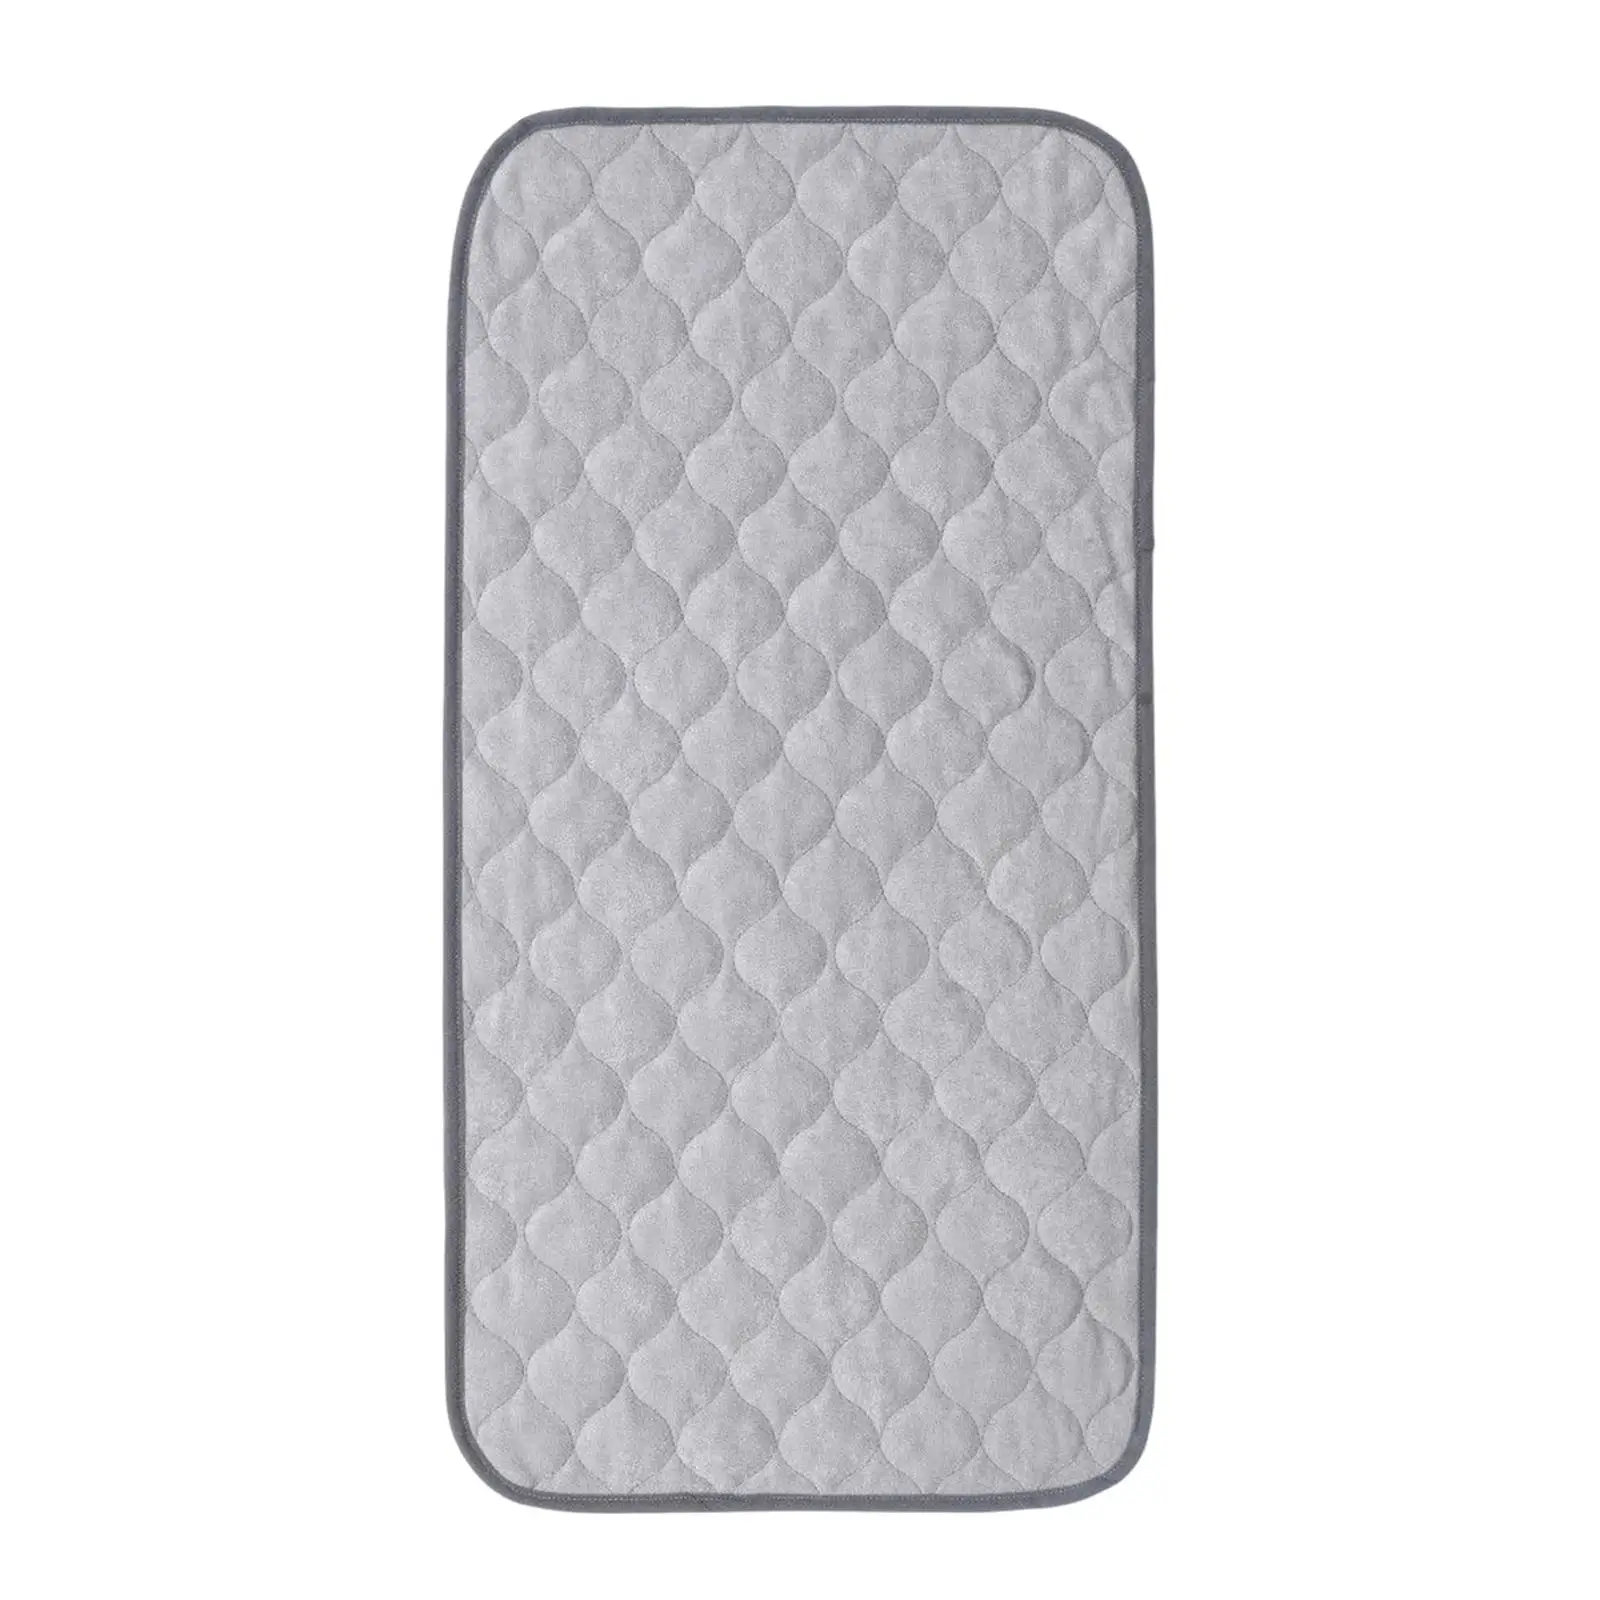 Bedding Changing Cover Sheet Protector Baby Infant Diaper Nappy Urine Mat Infant Urinal Pad for Baby Travel Home Outside